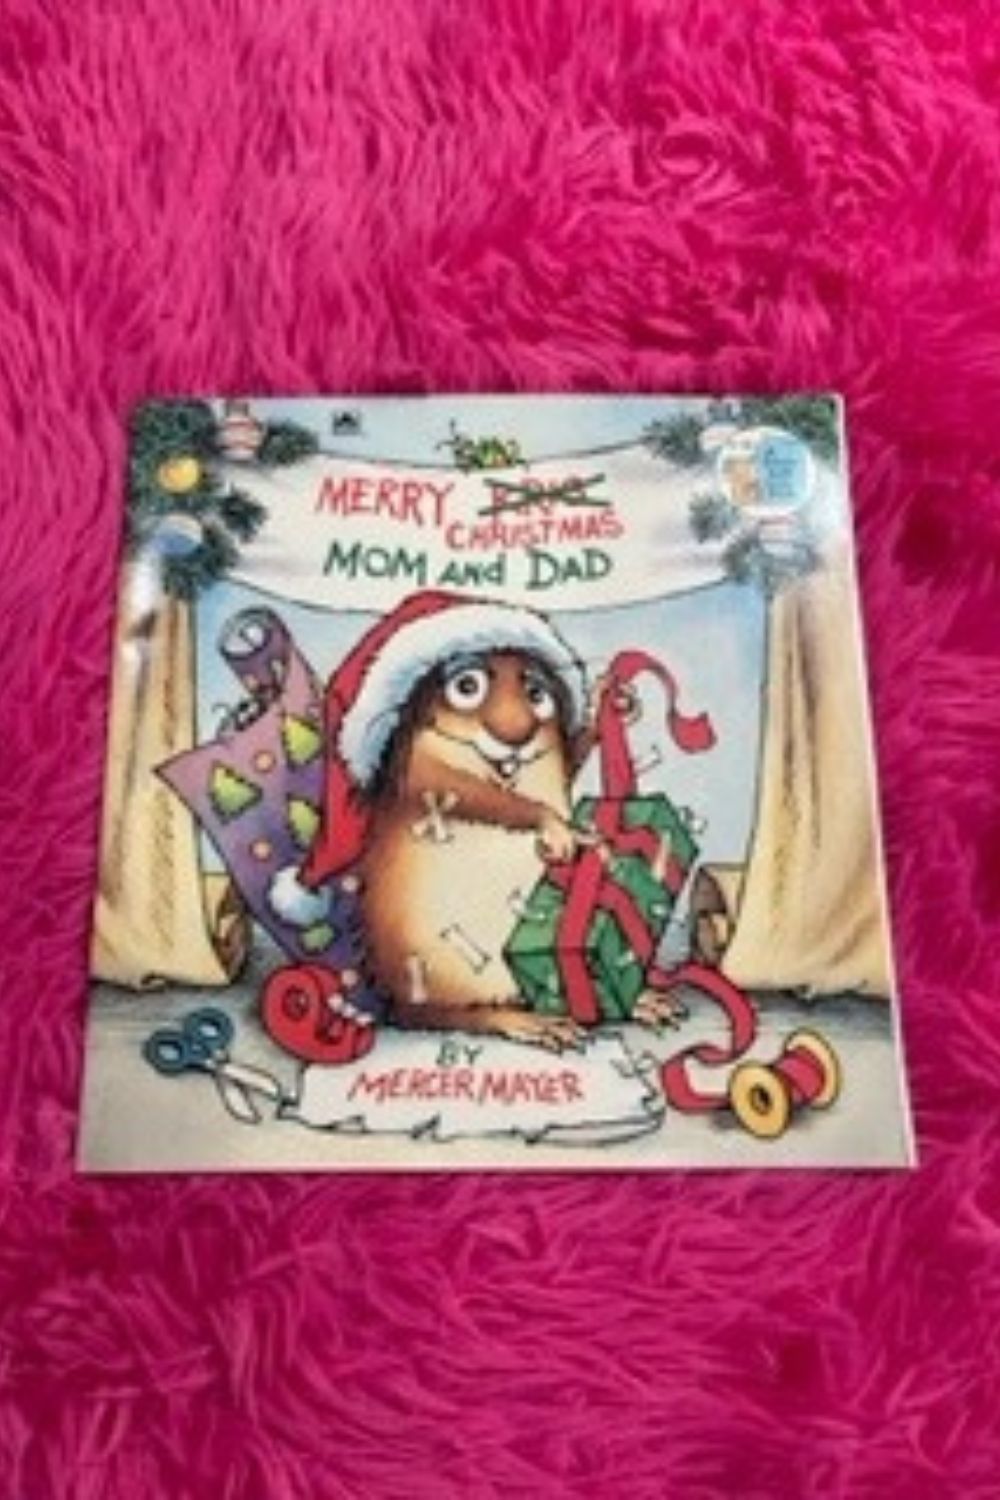 MERRY CHRISTMAS MOM AND DAD BOOK*